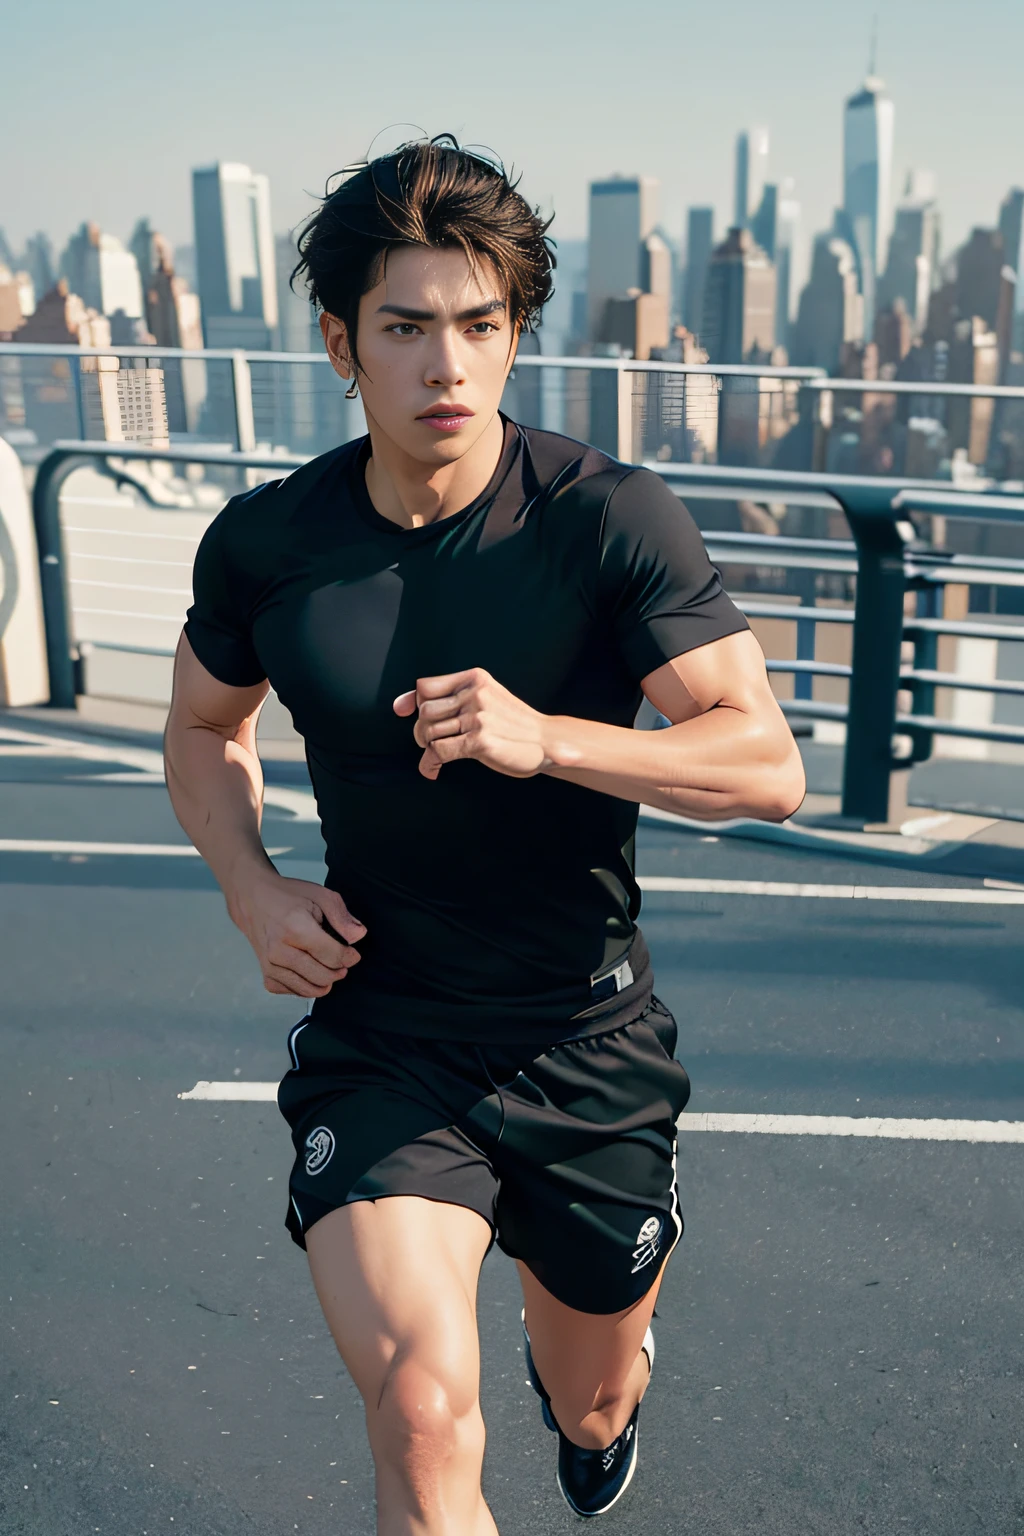 Character The man, his figure is fit and athletic, his eyes are focused and determined, reflecting his dedication to fitness. Expression His eyes are intense and forward-looking, short hair, 35 years old Japanese male, reflecting his concentration, and his lips are set in a firm line of determination. Outfit He is dressed in black color running gear, running shorts, and sports shoes, his hair is tousled from the run. Action He is seen jogging up a city manhattan, his stance balanced, his body moving rhythmically with each stride. Foreground (Cityscape of New York:1.33), finely detailed background,beautiful detailed sky,bright sunlight,(strong sunlight:1.21), cinematic lighting, vibrant color,soft lighting,best shadow,shadow casting,